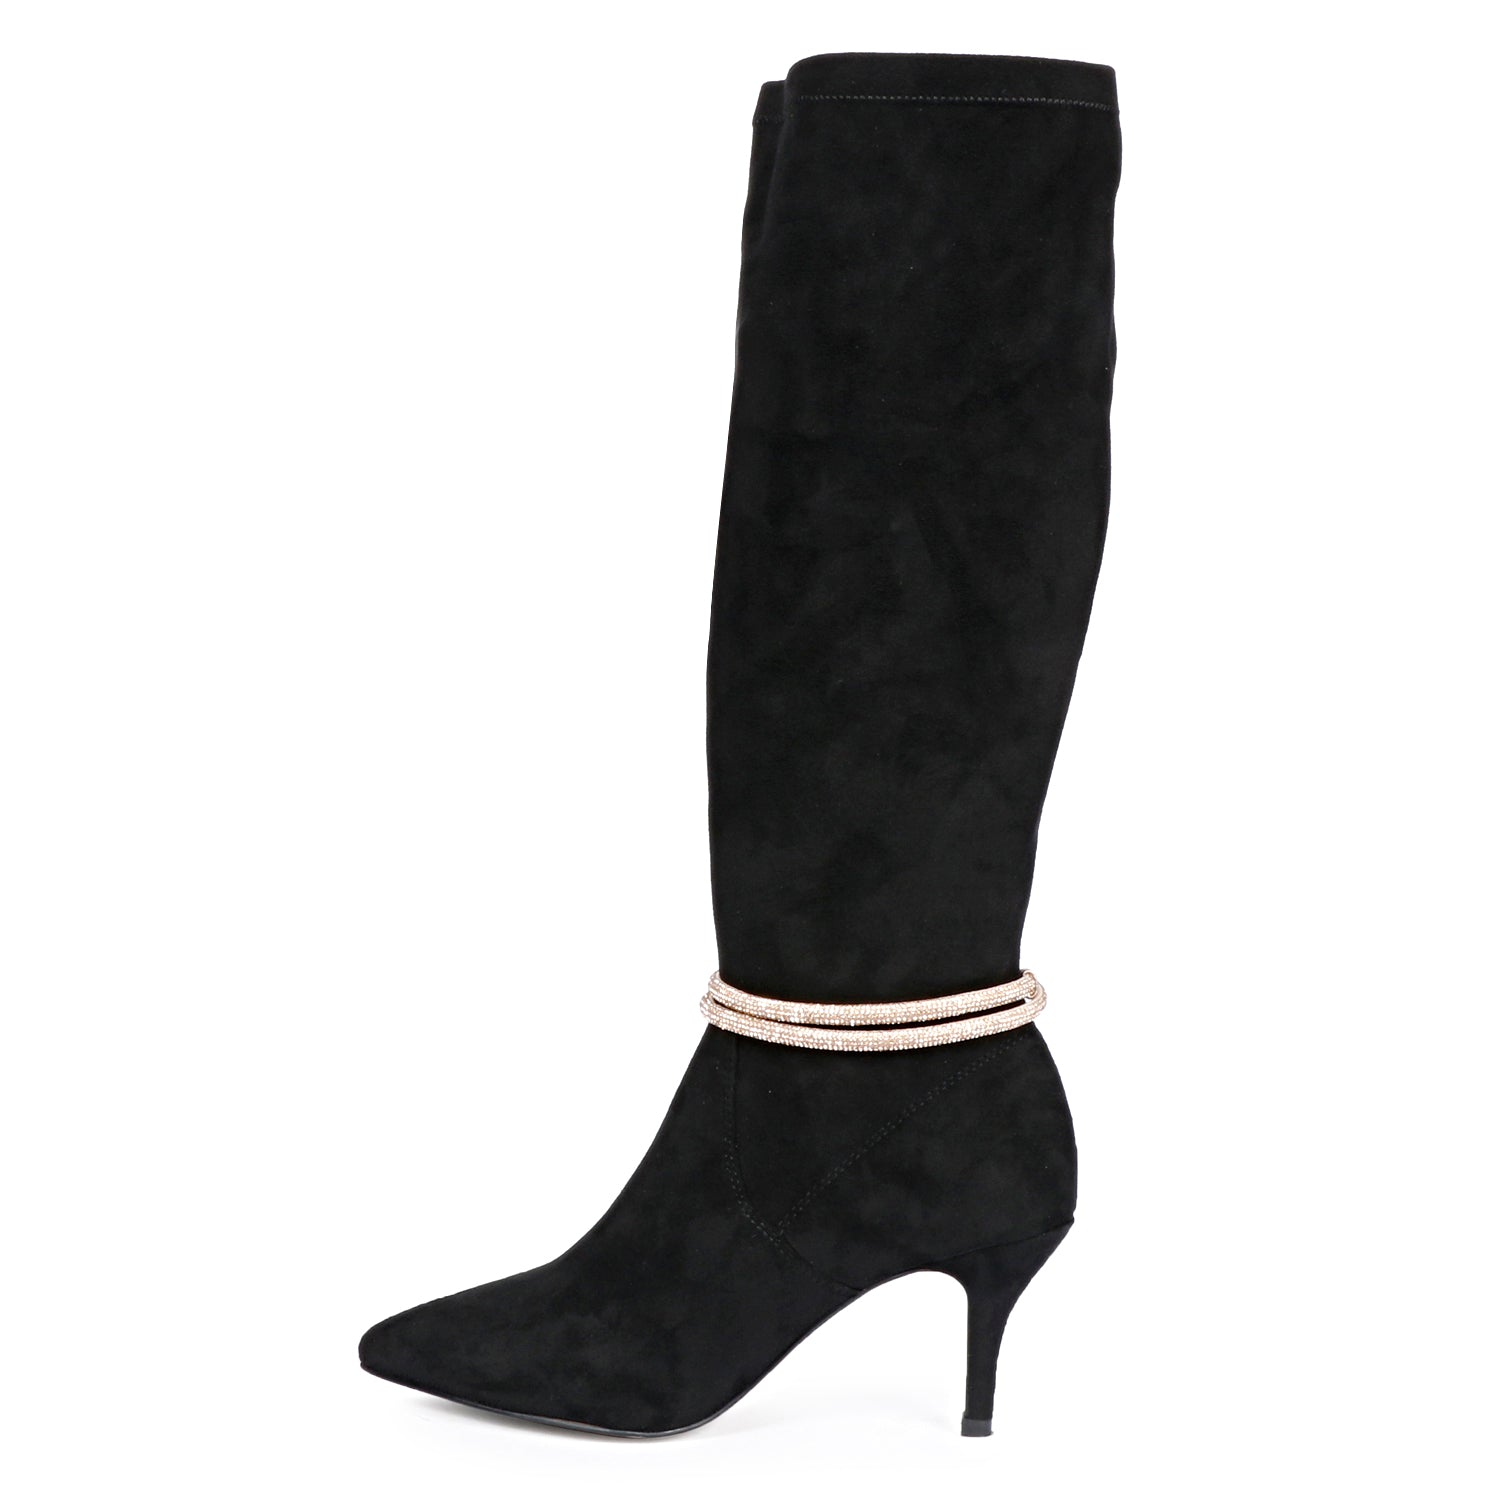 I.N.C. International Concepts Havannah Wide Calf Knee High Stovepipe Dress  Boots, Created for Macy's - Macy's